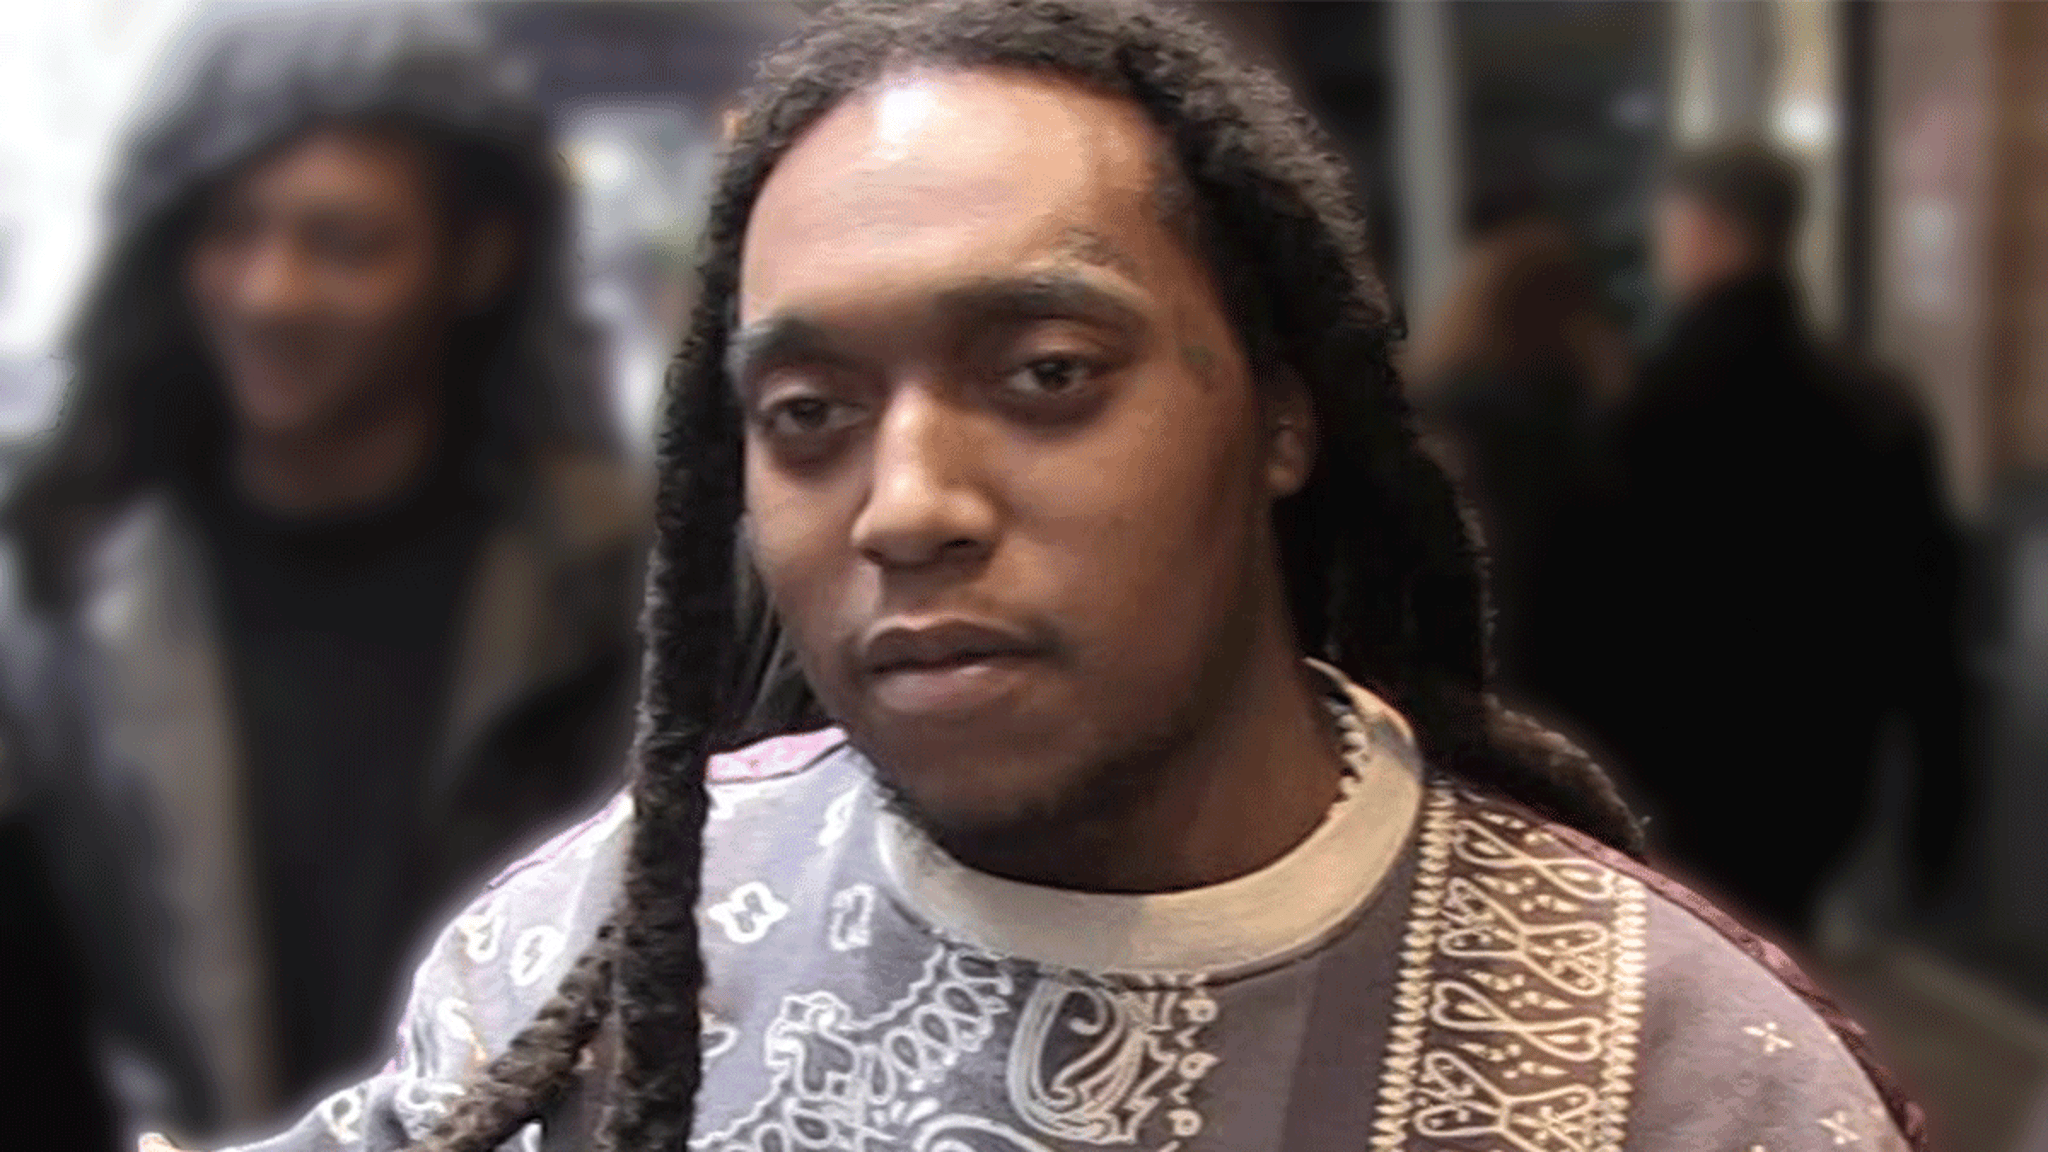 Takeoff's Alleged Murderer Requests Funds to Hire Private Investigator 